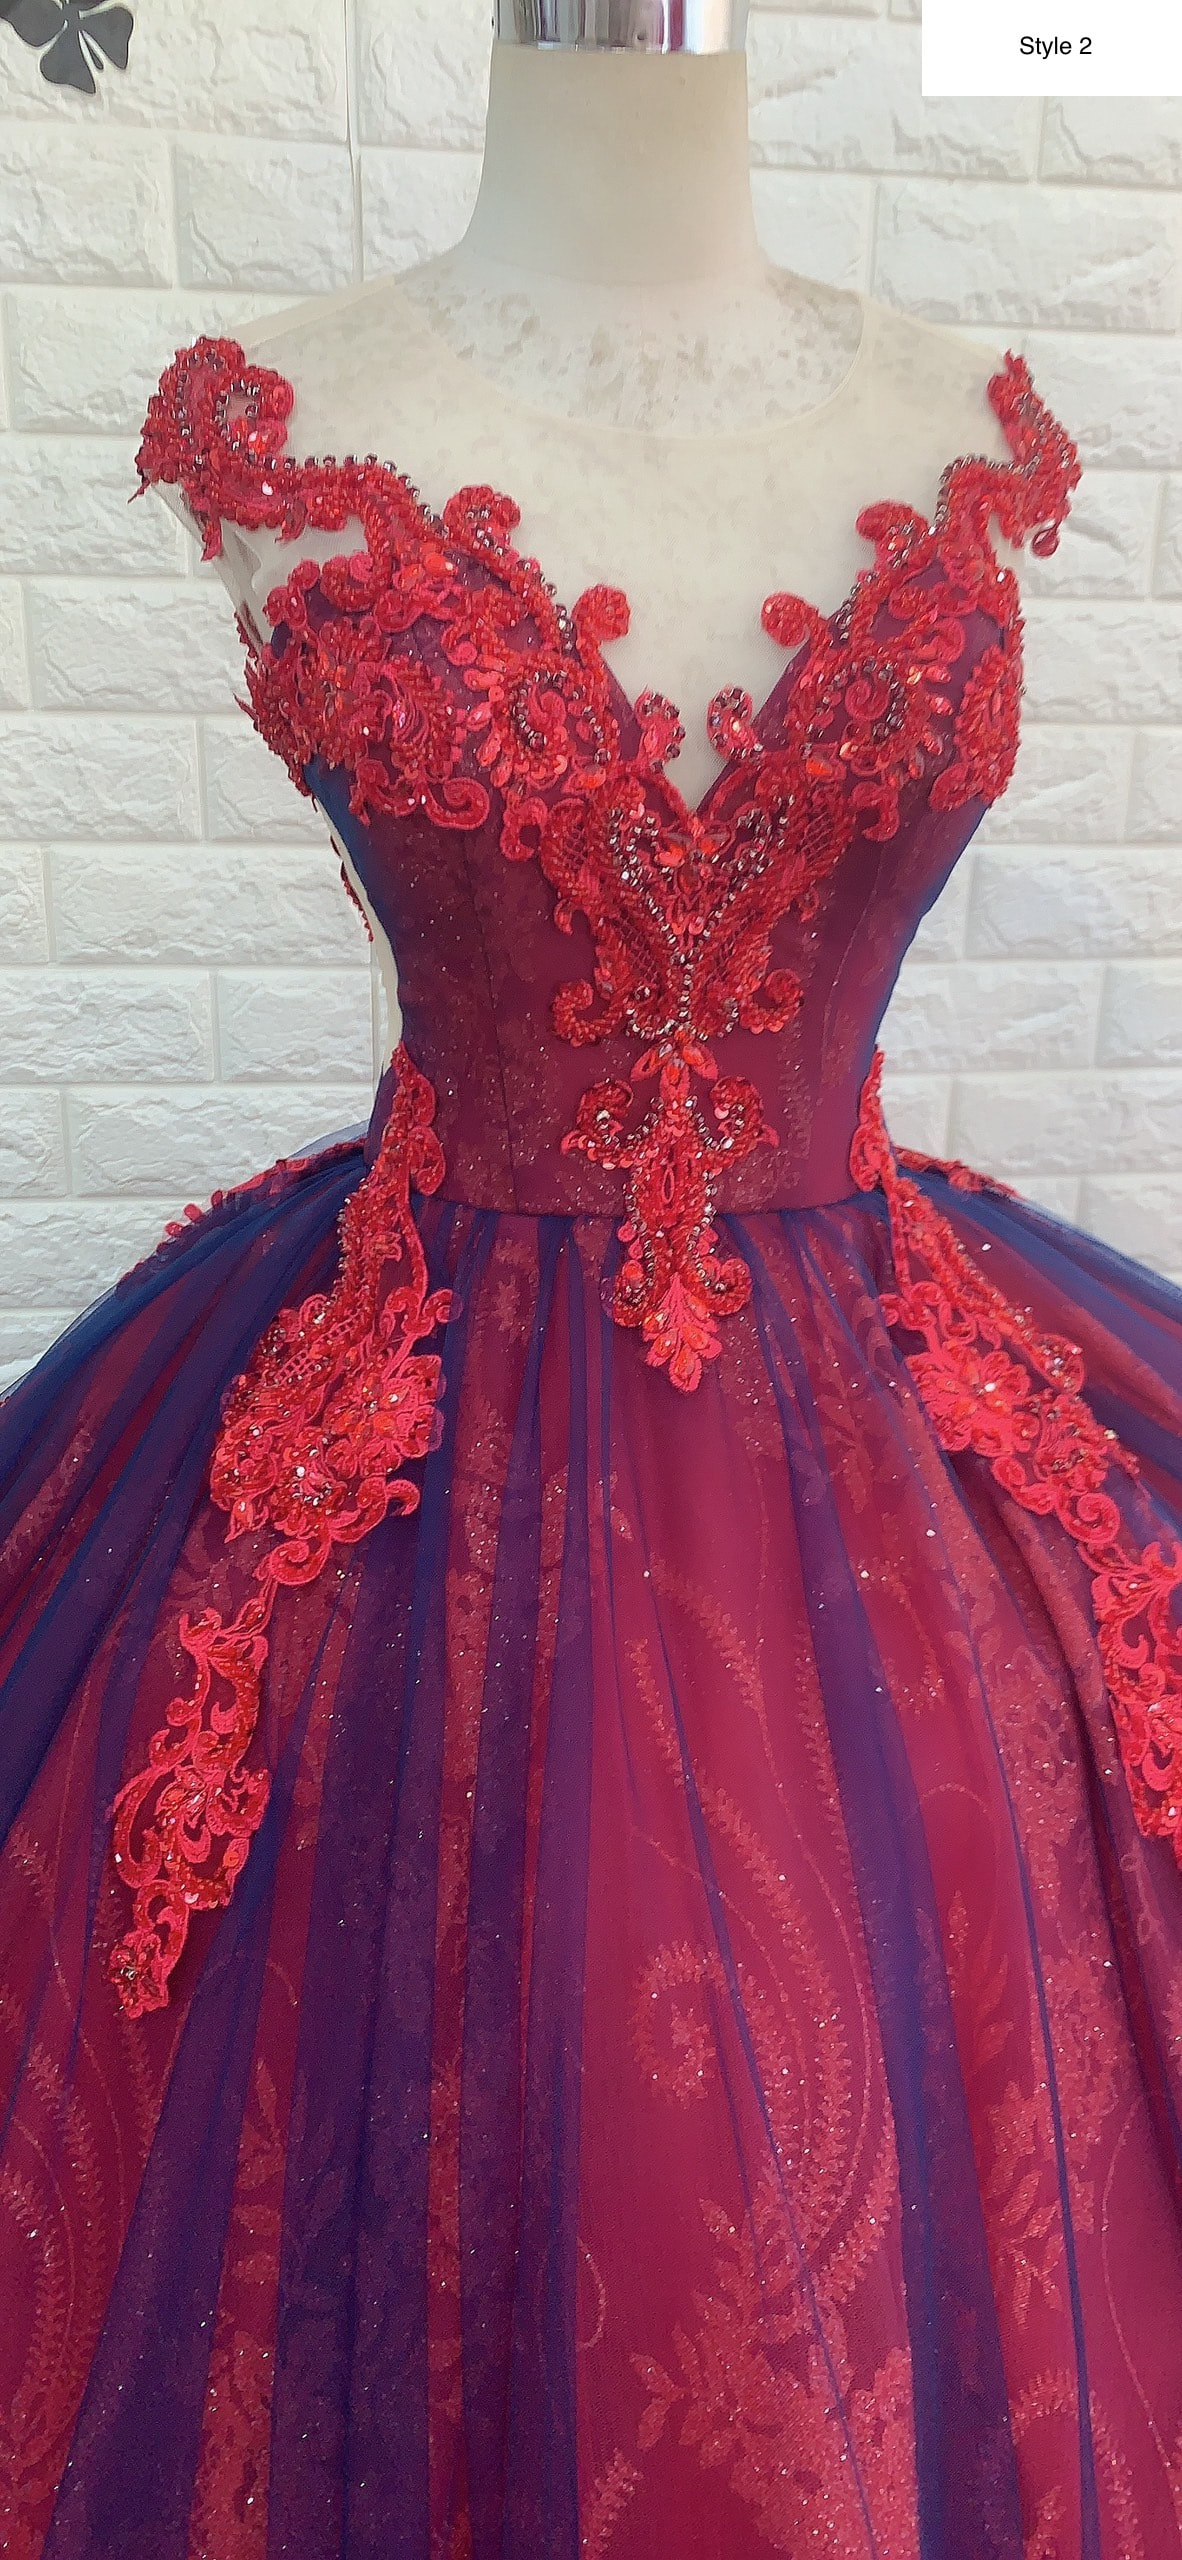 Layered/ Tiered/ Pleated Tulle Skirt off the Shoulder Red Ballgown Wedding  or Prom Dress Various Styles - Etsy Australia